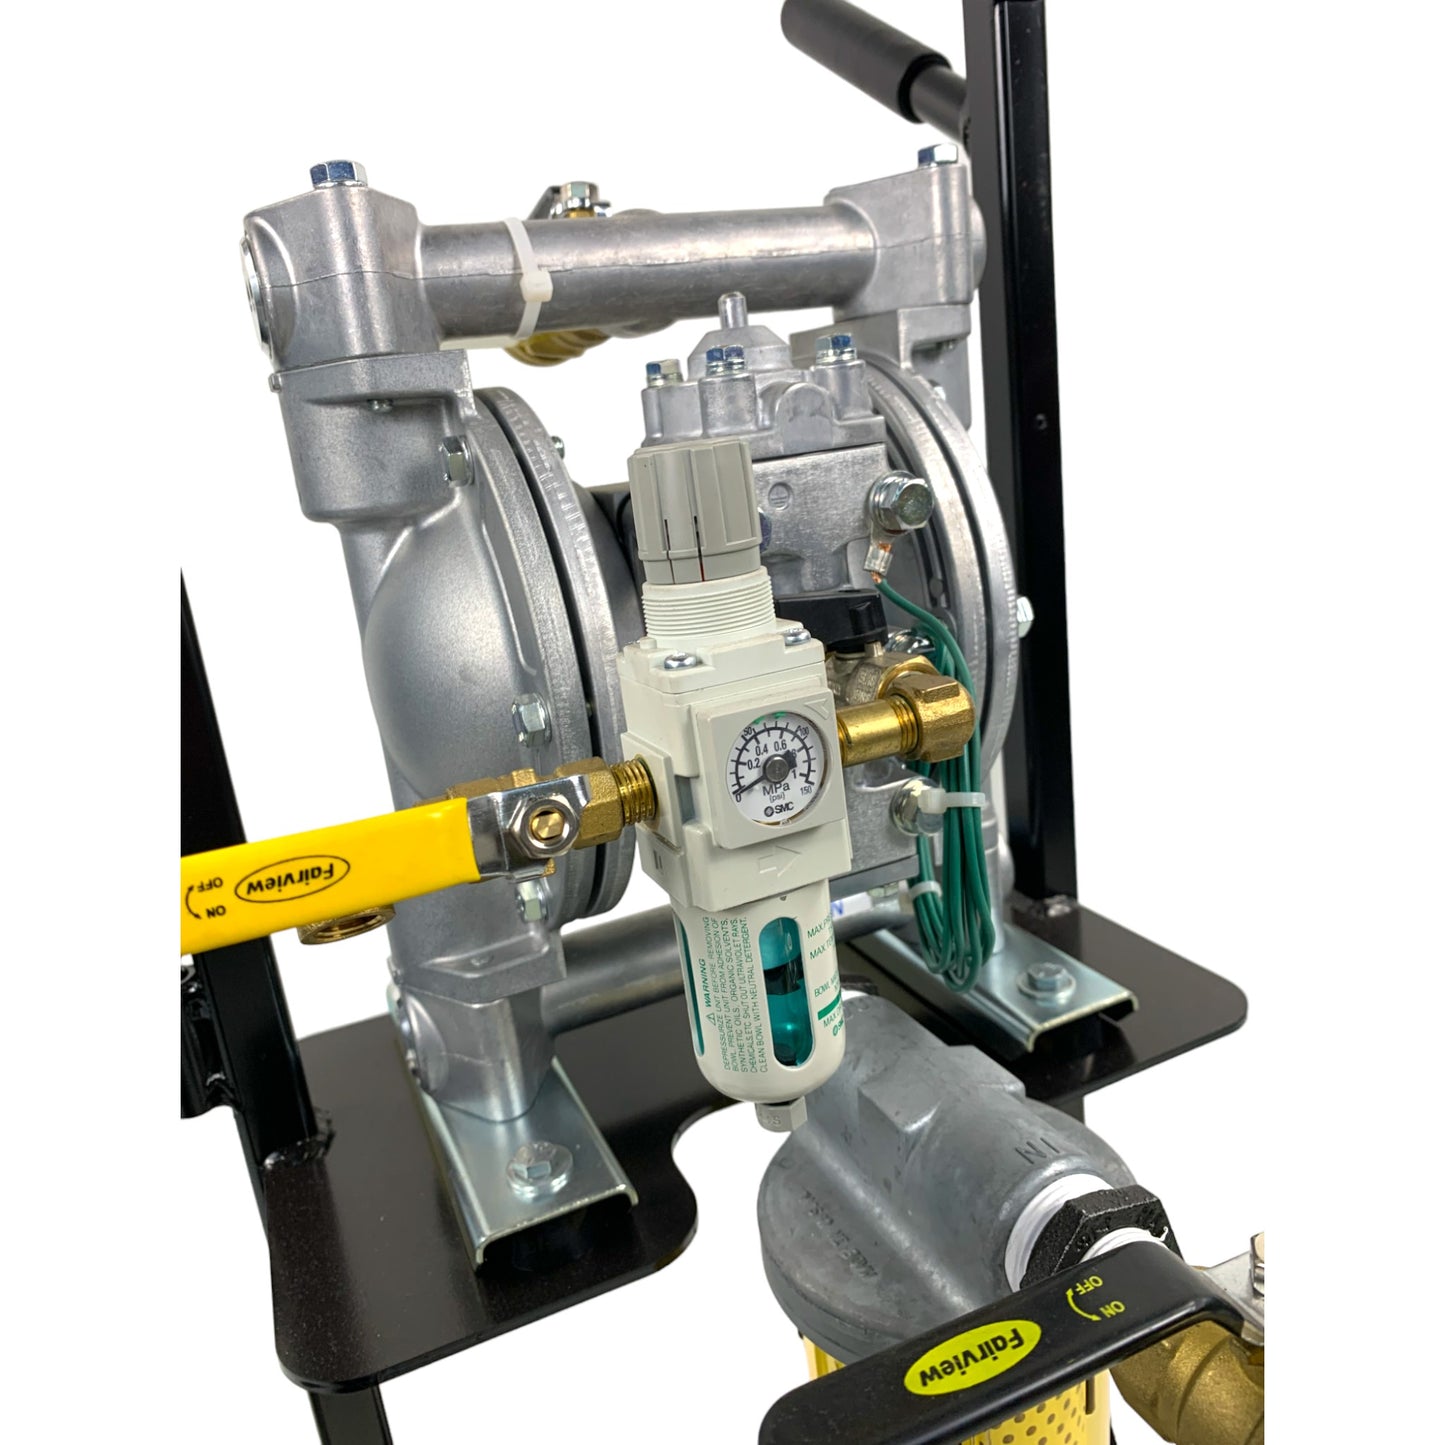 WEN101TS - Gas Accelerator Mobile Fluid Transfer System with Heavy Duty Diaphragm Air Pump